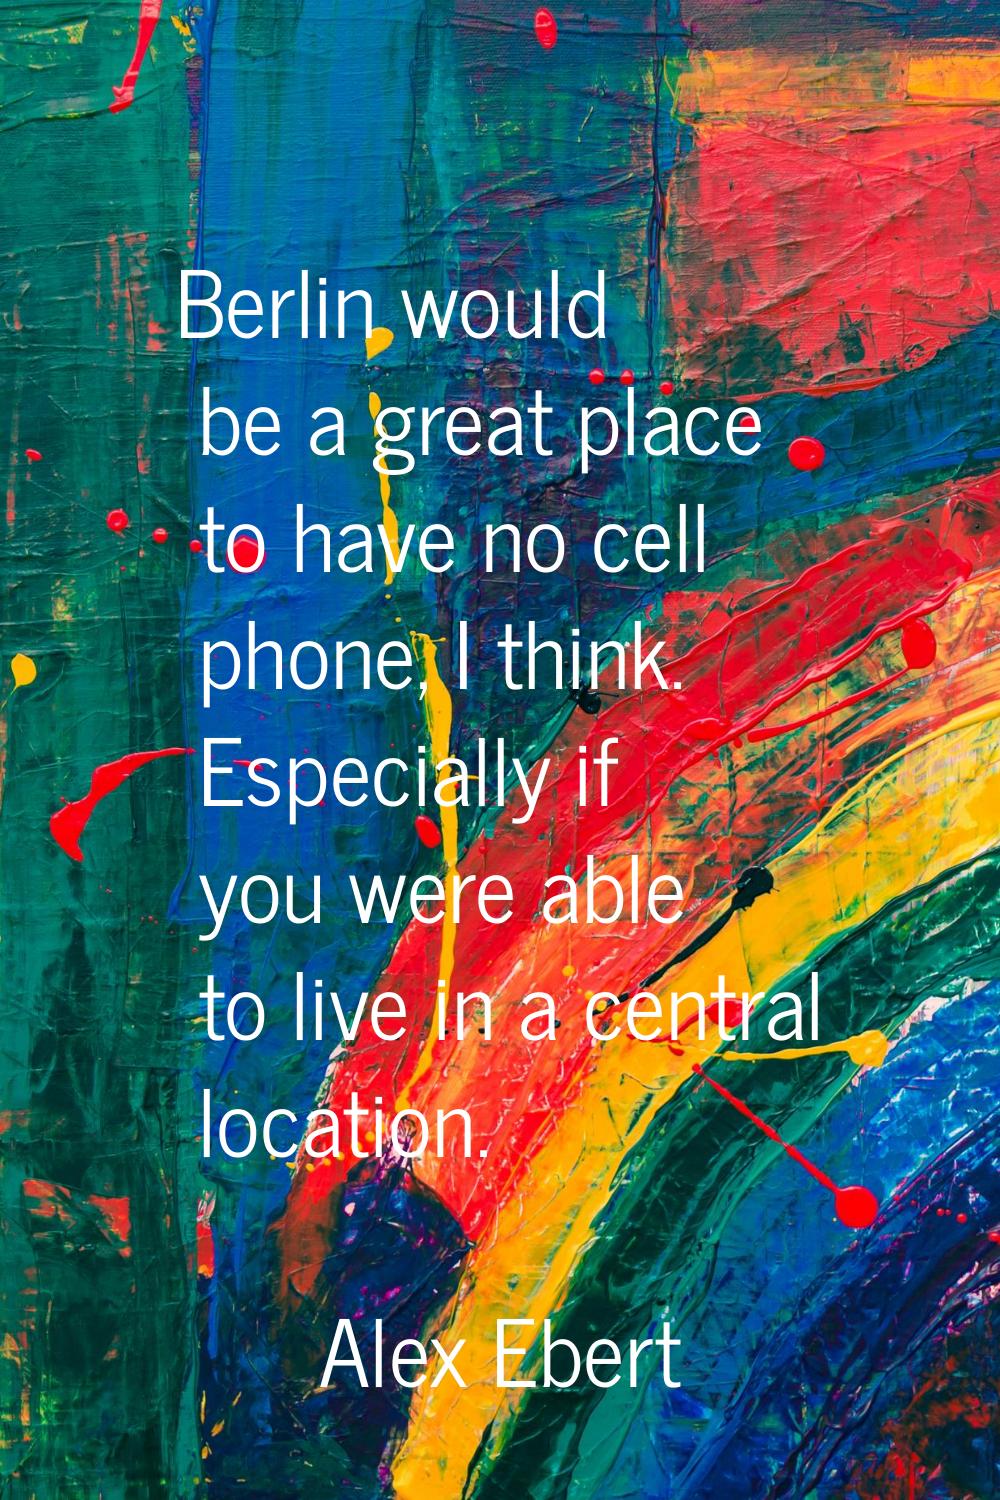 Berlin would be a great place to have no cell phone, I think. Especially if you were able to live i